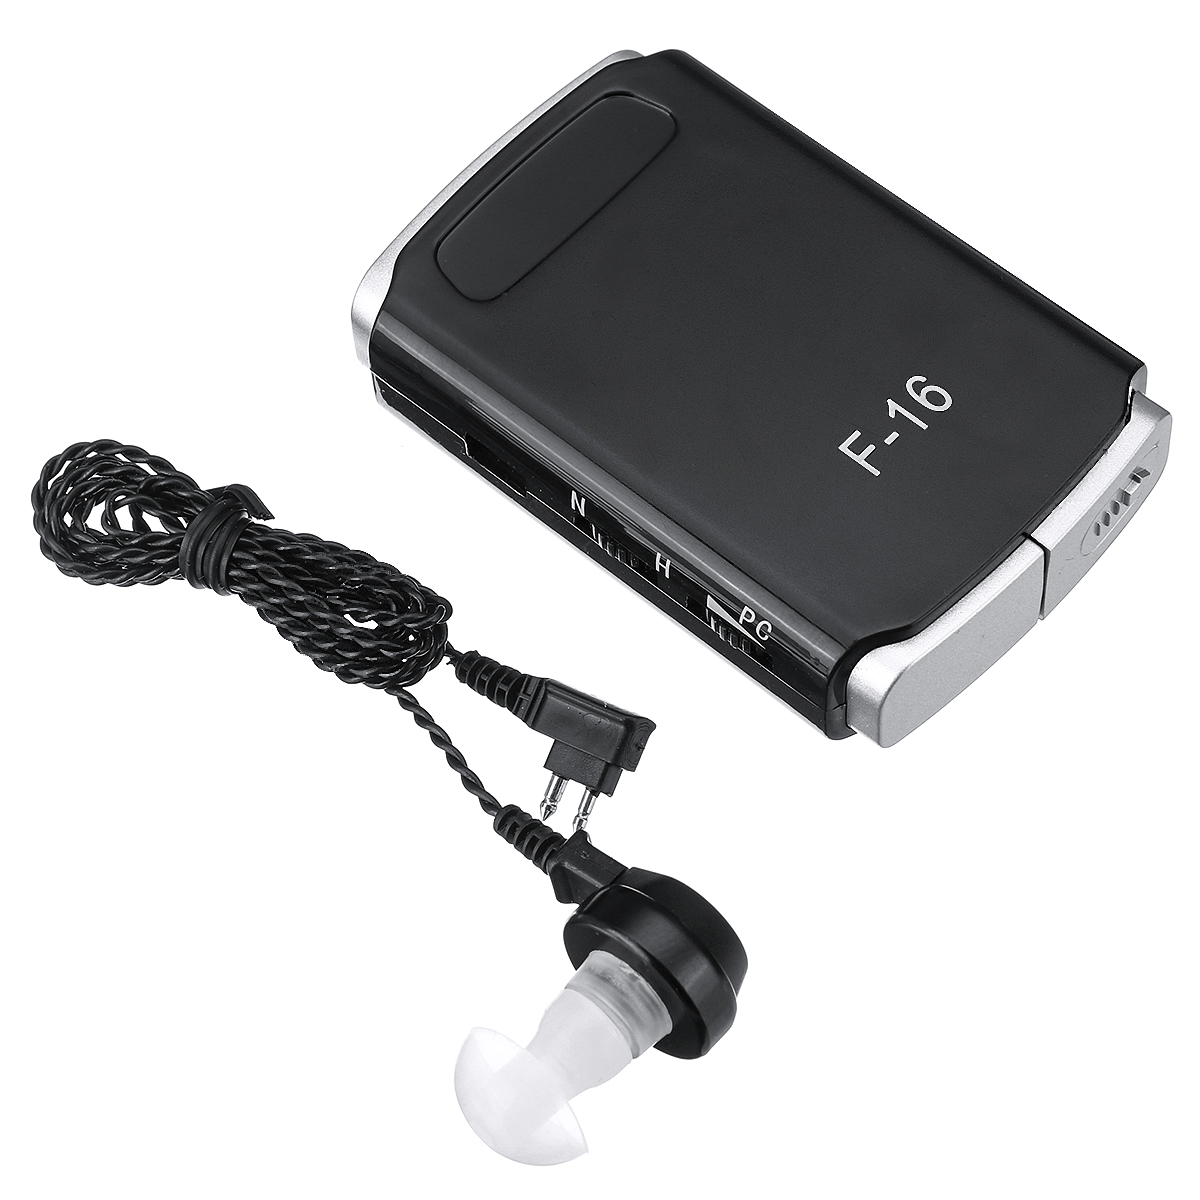 Personal-Sound-Amplifier-Voice-Enhancer-Device-Personal-Audio-Amplifier-Pocket-Hearing-Devices-Heari-1403743